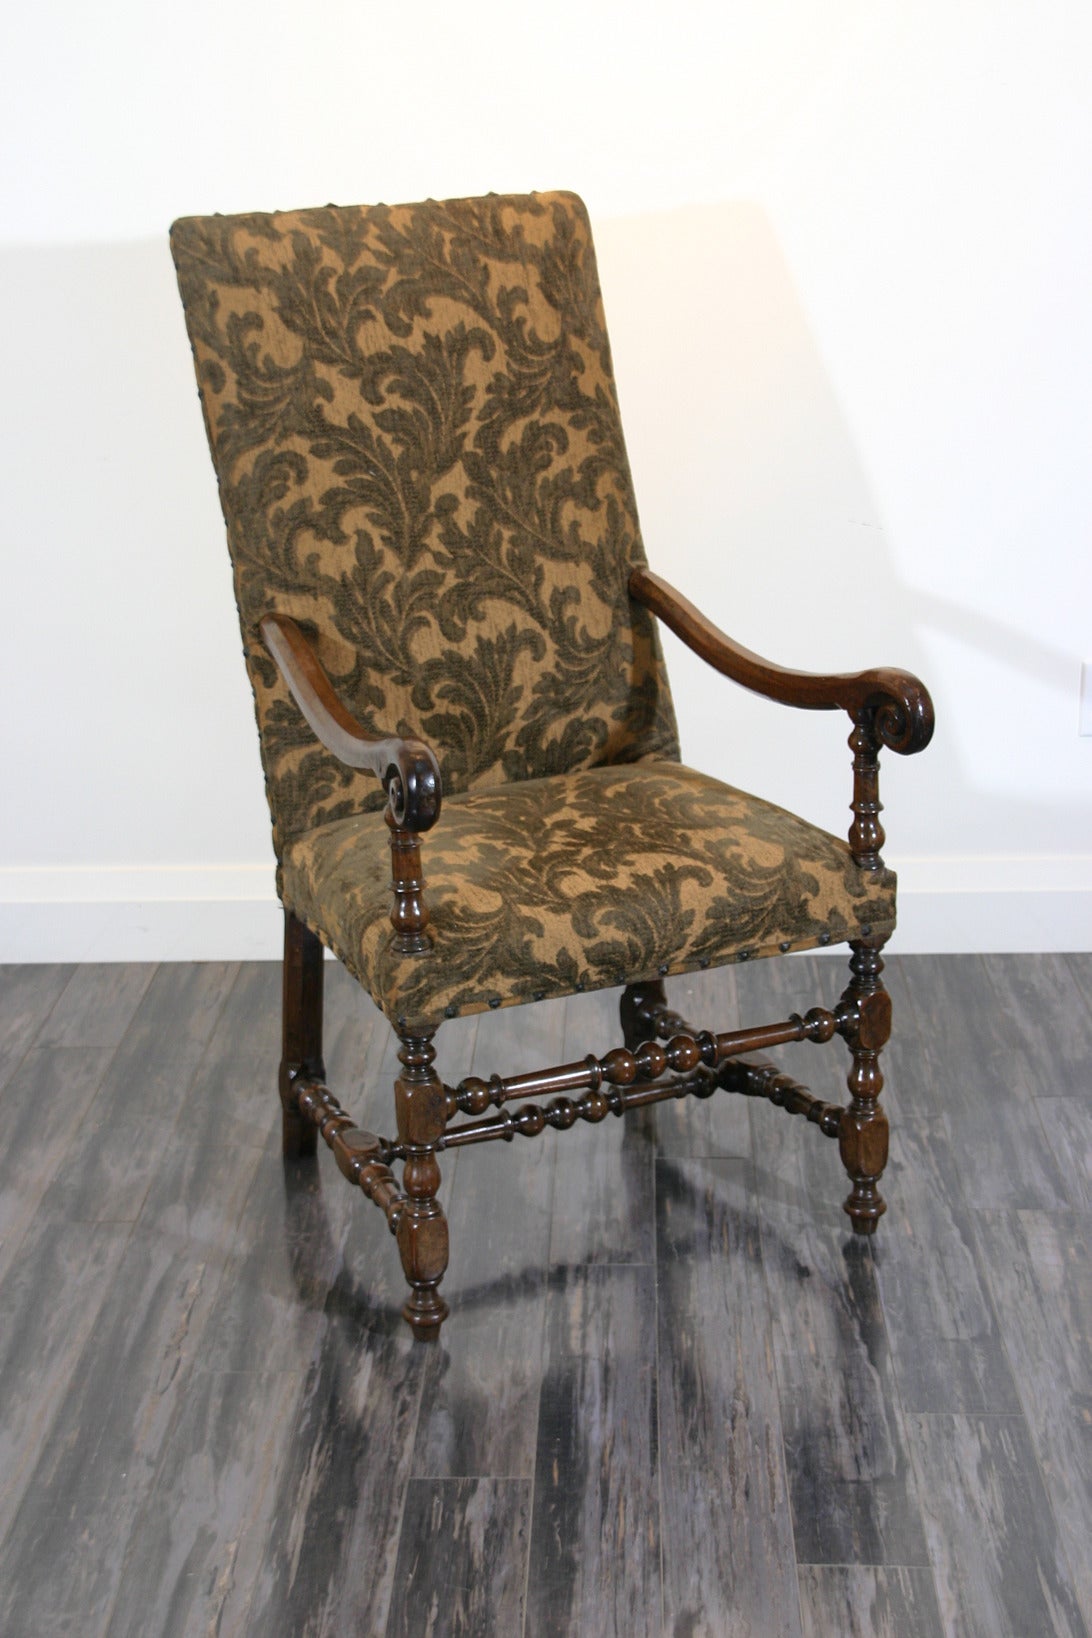 A French late 17th century Baroque walnut armchair with scrolled arms and turned legs and connecting stretchers.